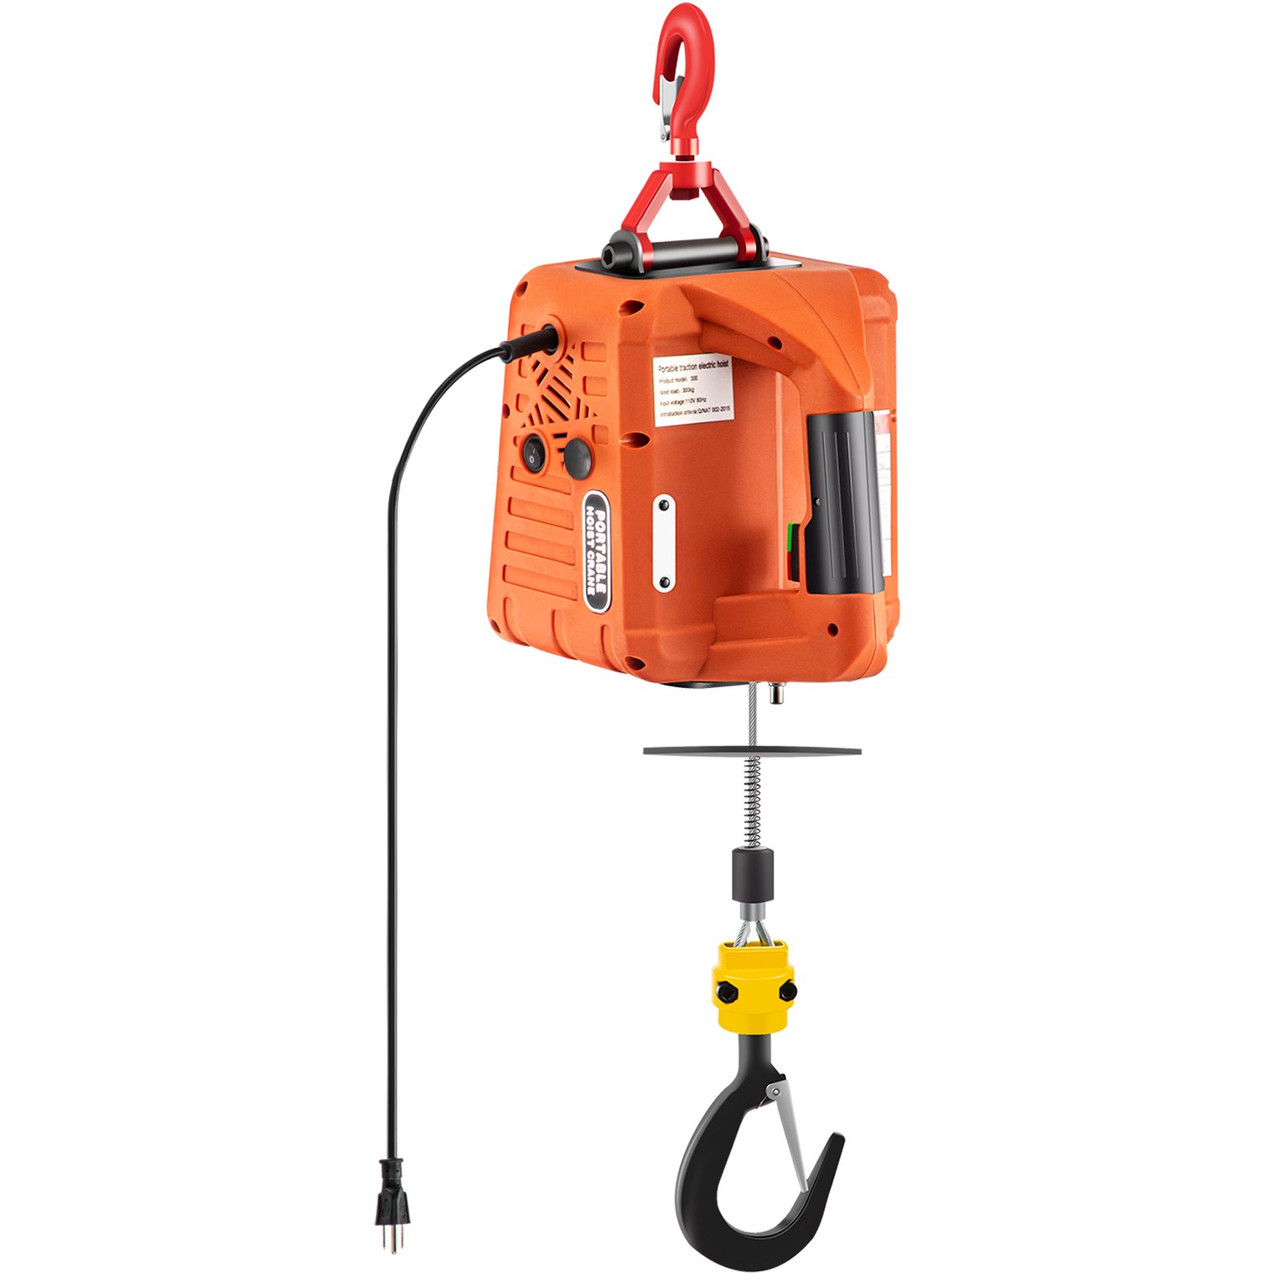 Electric Hoist Winch, 1100lbs Portable Electric Winch, 1500W 110V Power Winch Crane, 25ft Lifting Height, w/Wireless Remote Control and Overload Protection for Garages Warehouse Lifting Towing